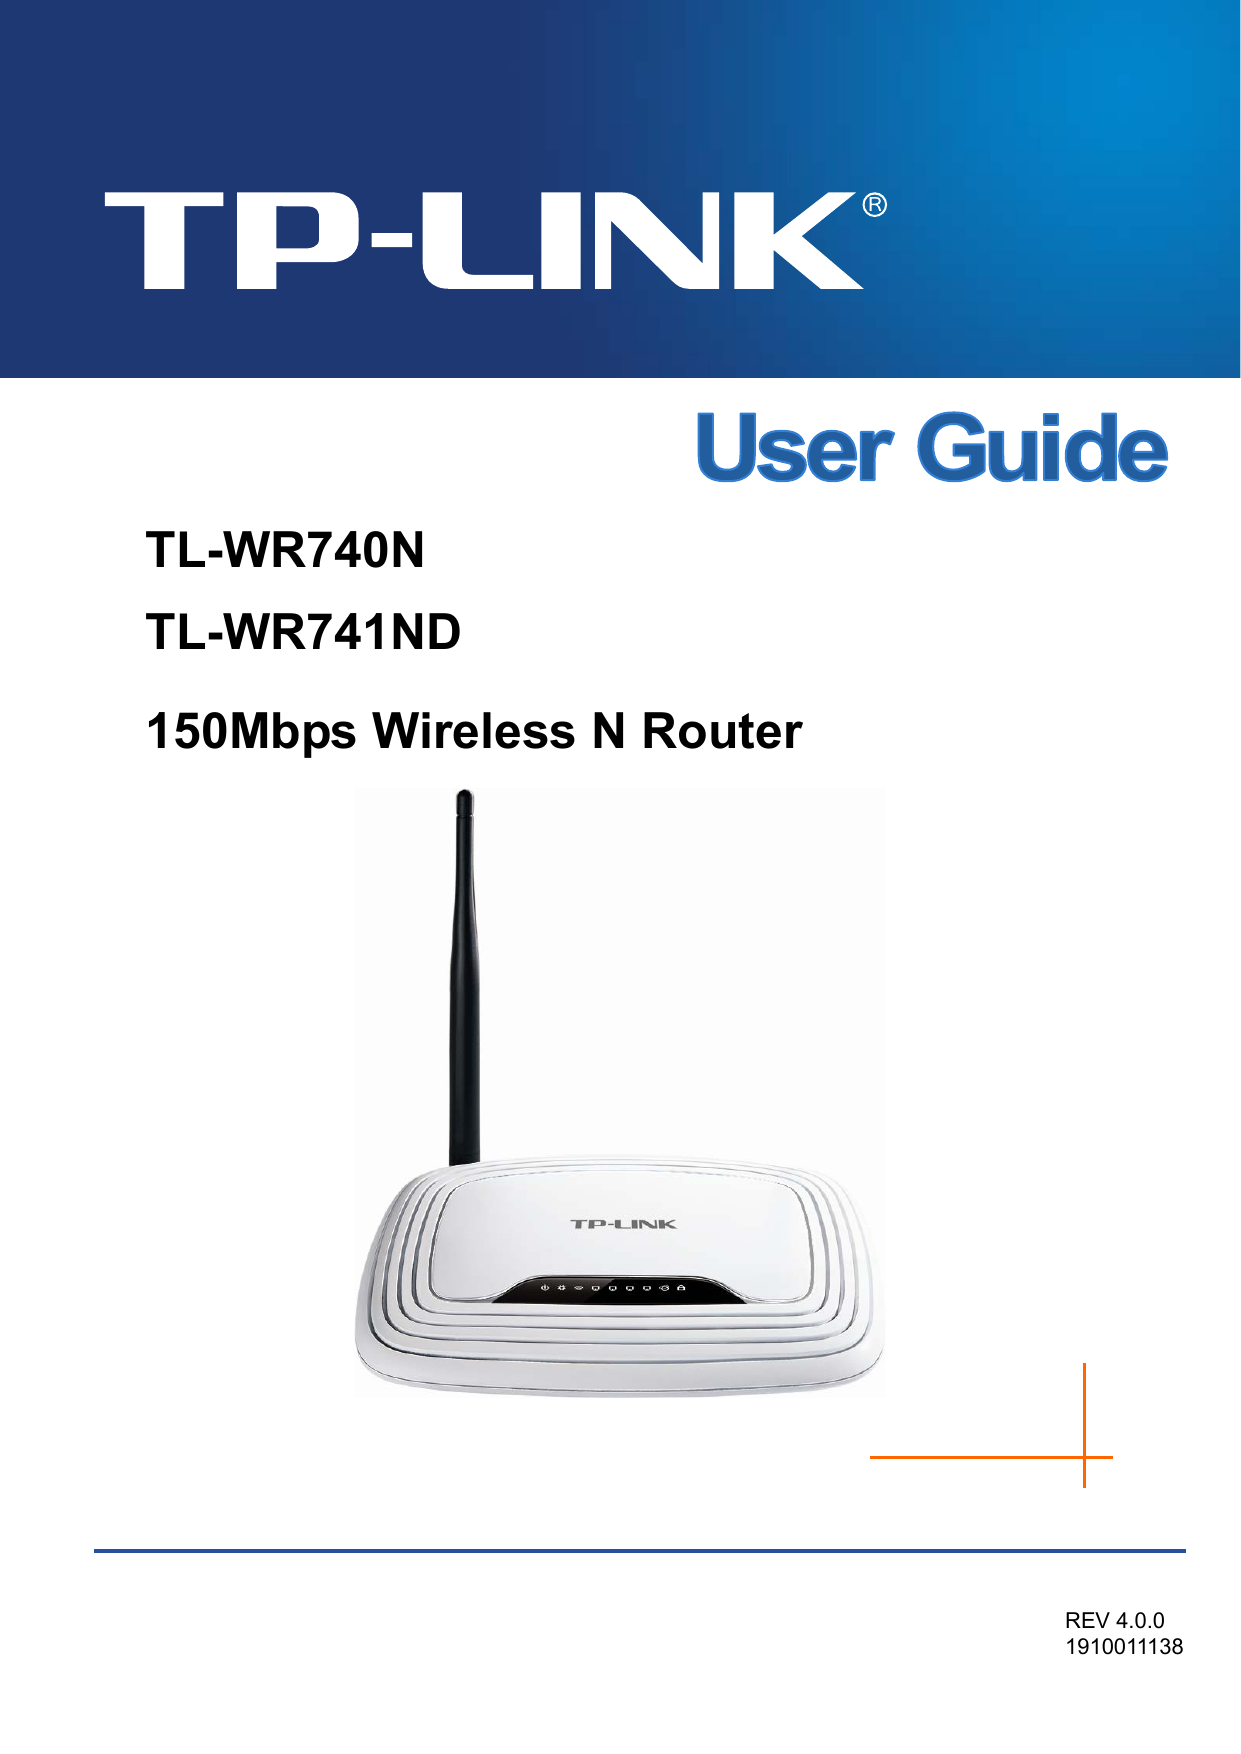   TL-WR740N TL-WR741ND 150Mbps Wireless N Router   REV 4.0.0 1910011138  